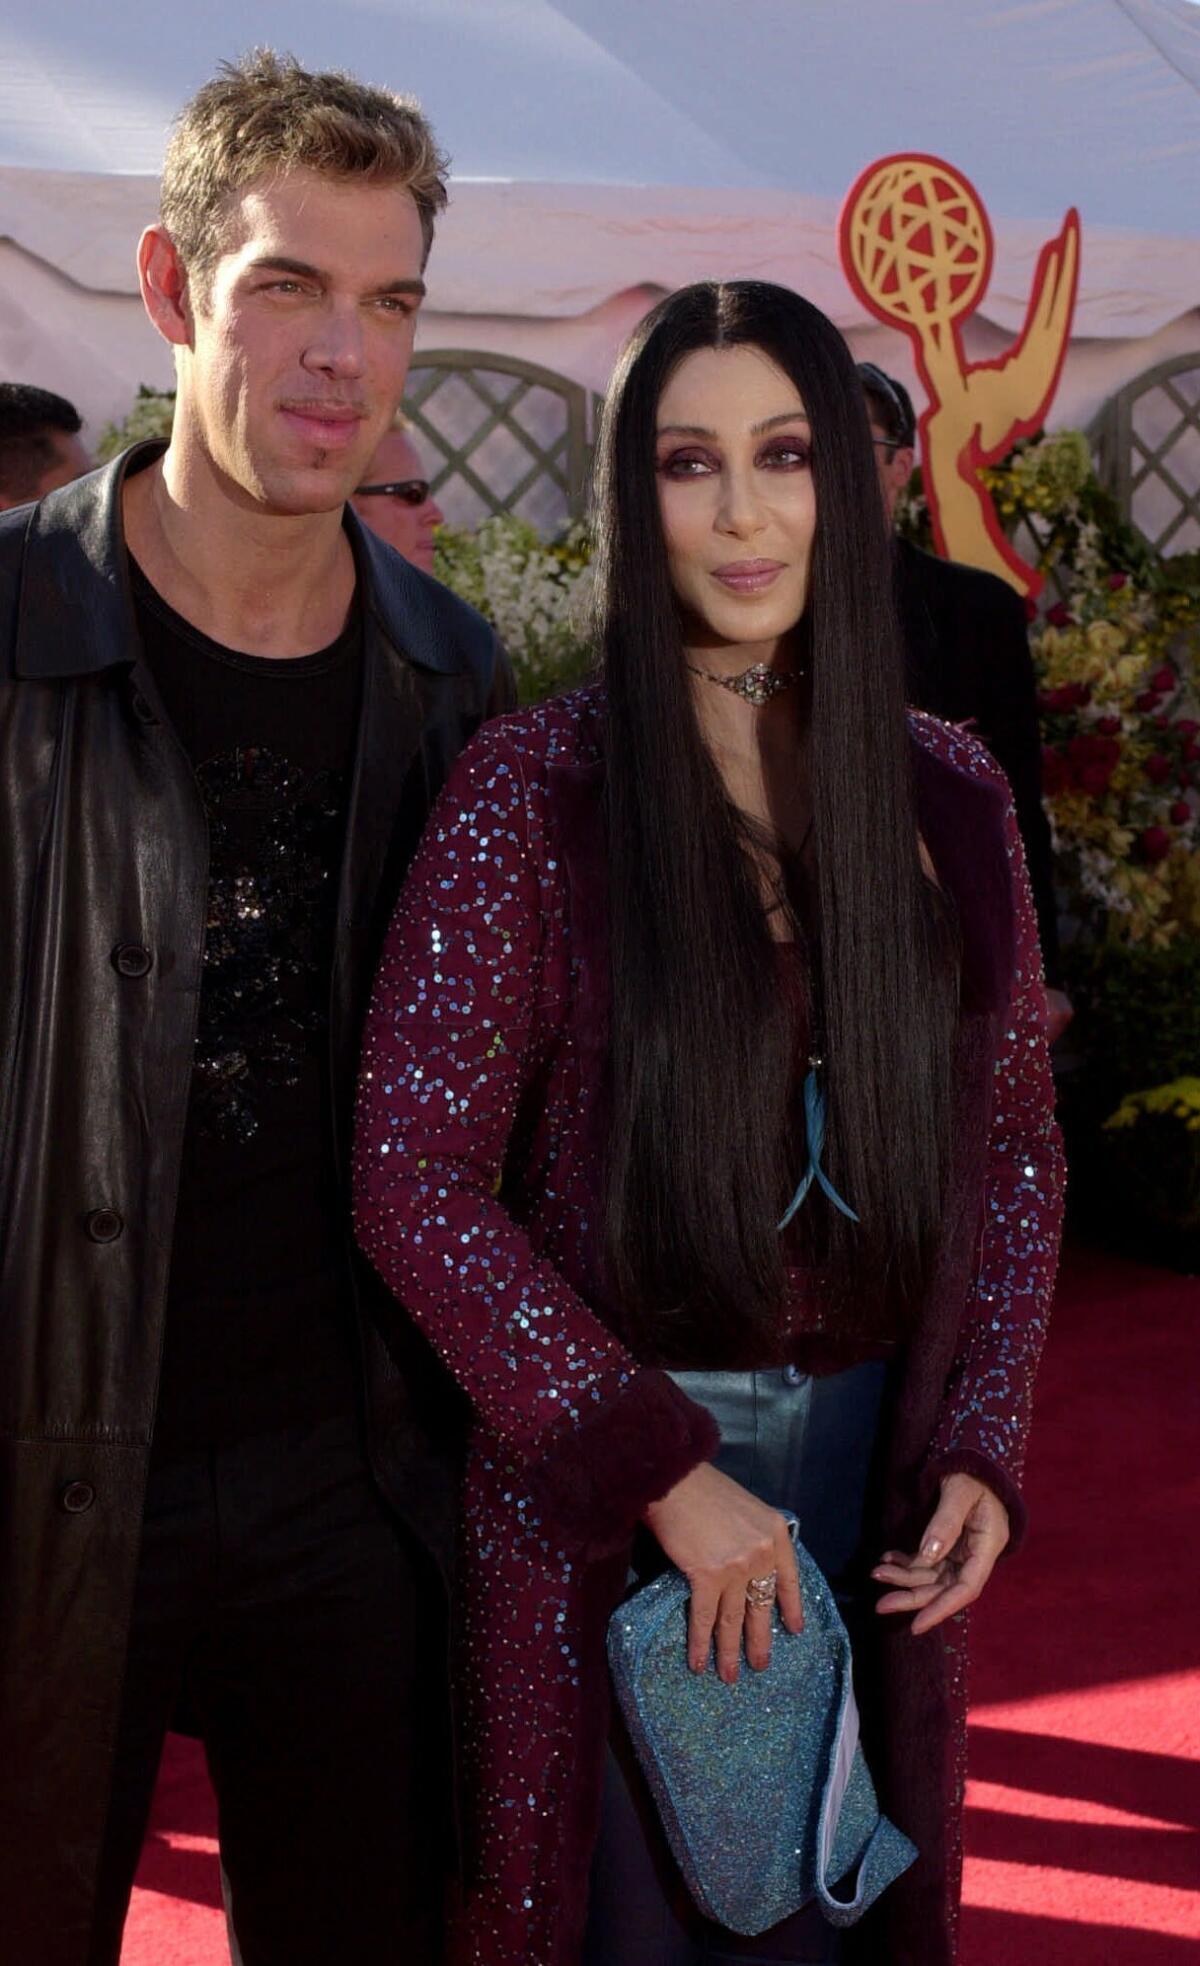 Kevyn Aucoin, shown in 2000 with Cher, will be showcased in a special "Icon Gallery" exhibition at the Makeup Show L.A.